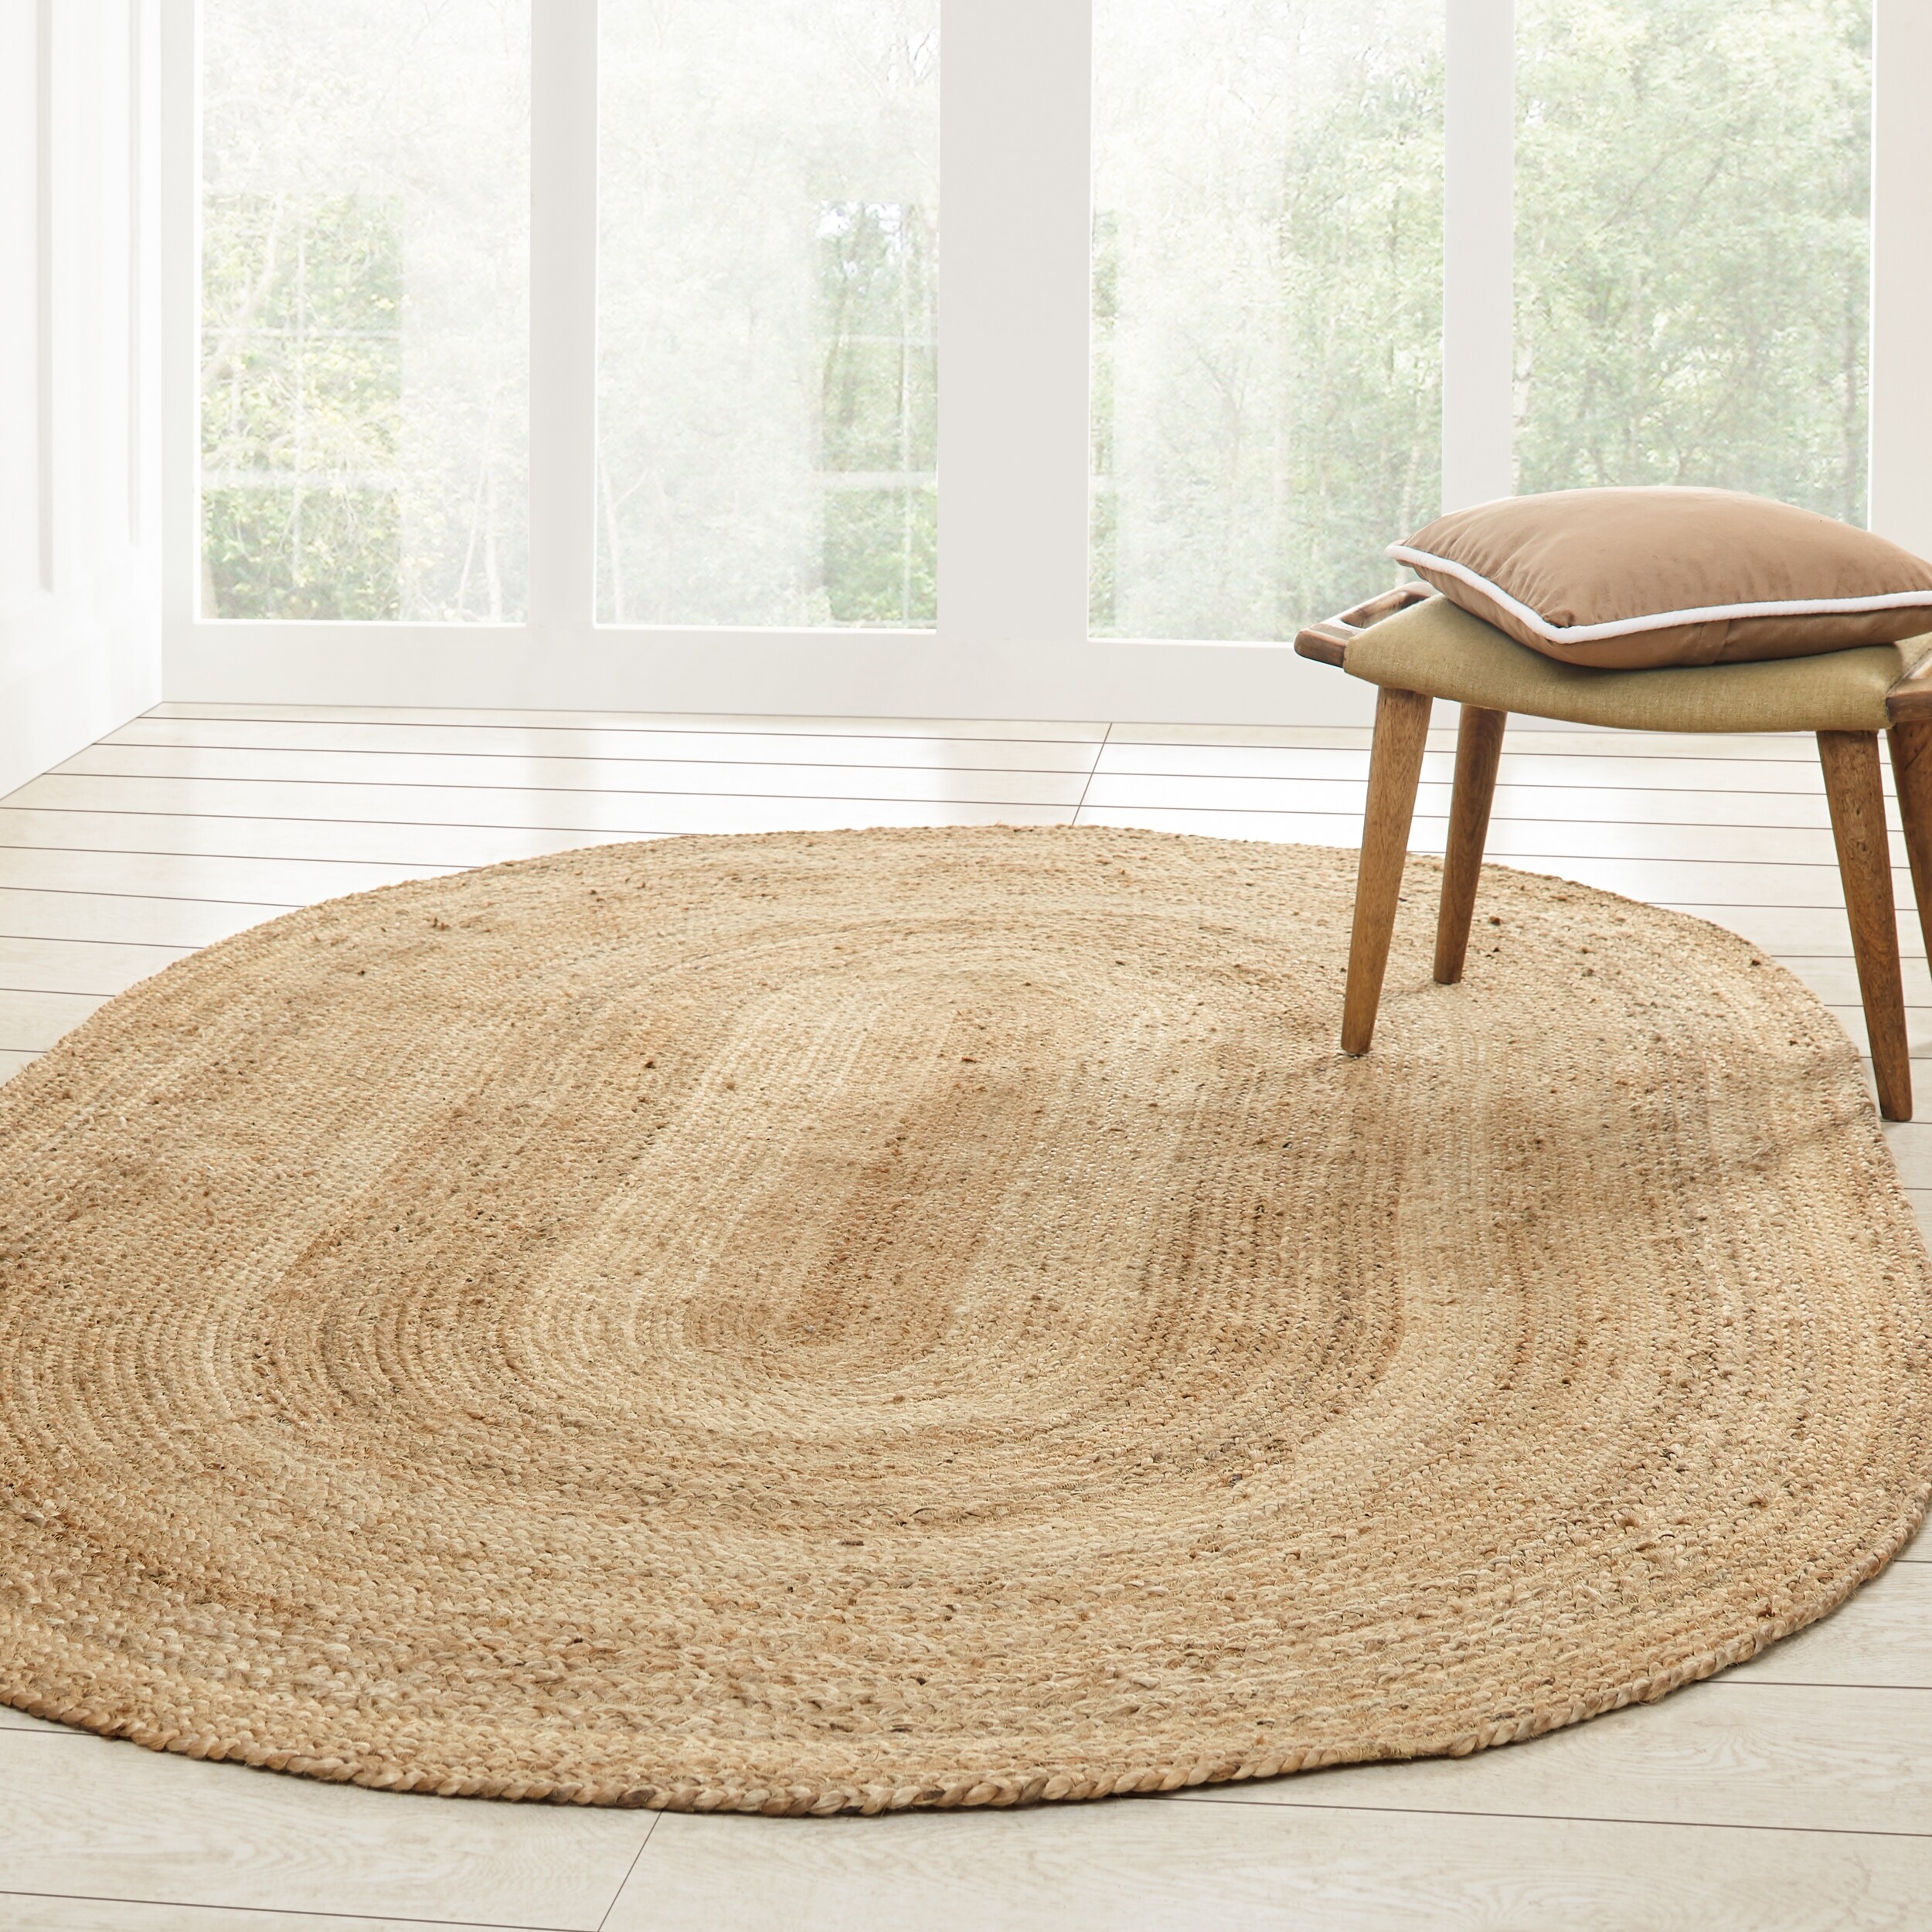 Natural Jute Braid Floor Rug Oval Shaped Hand Woven Reversible Area Rug 